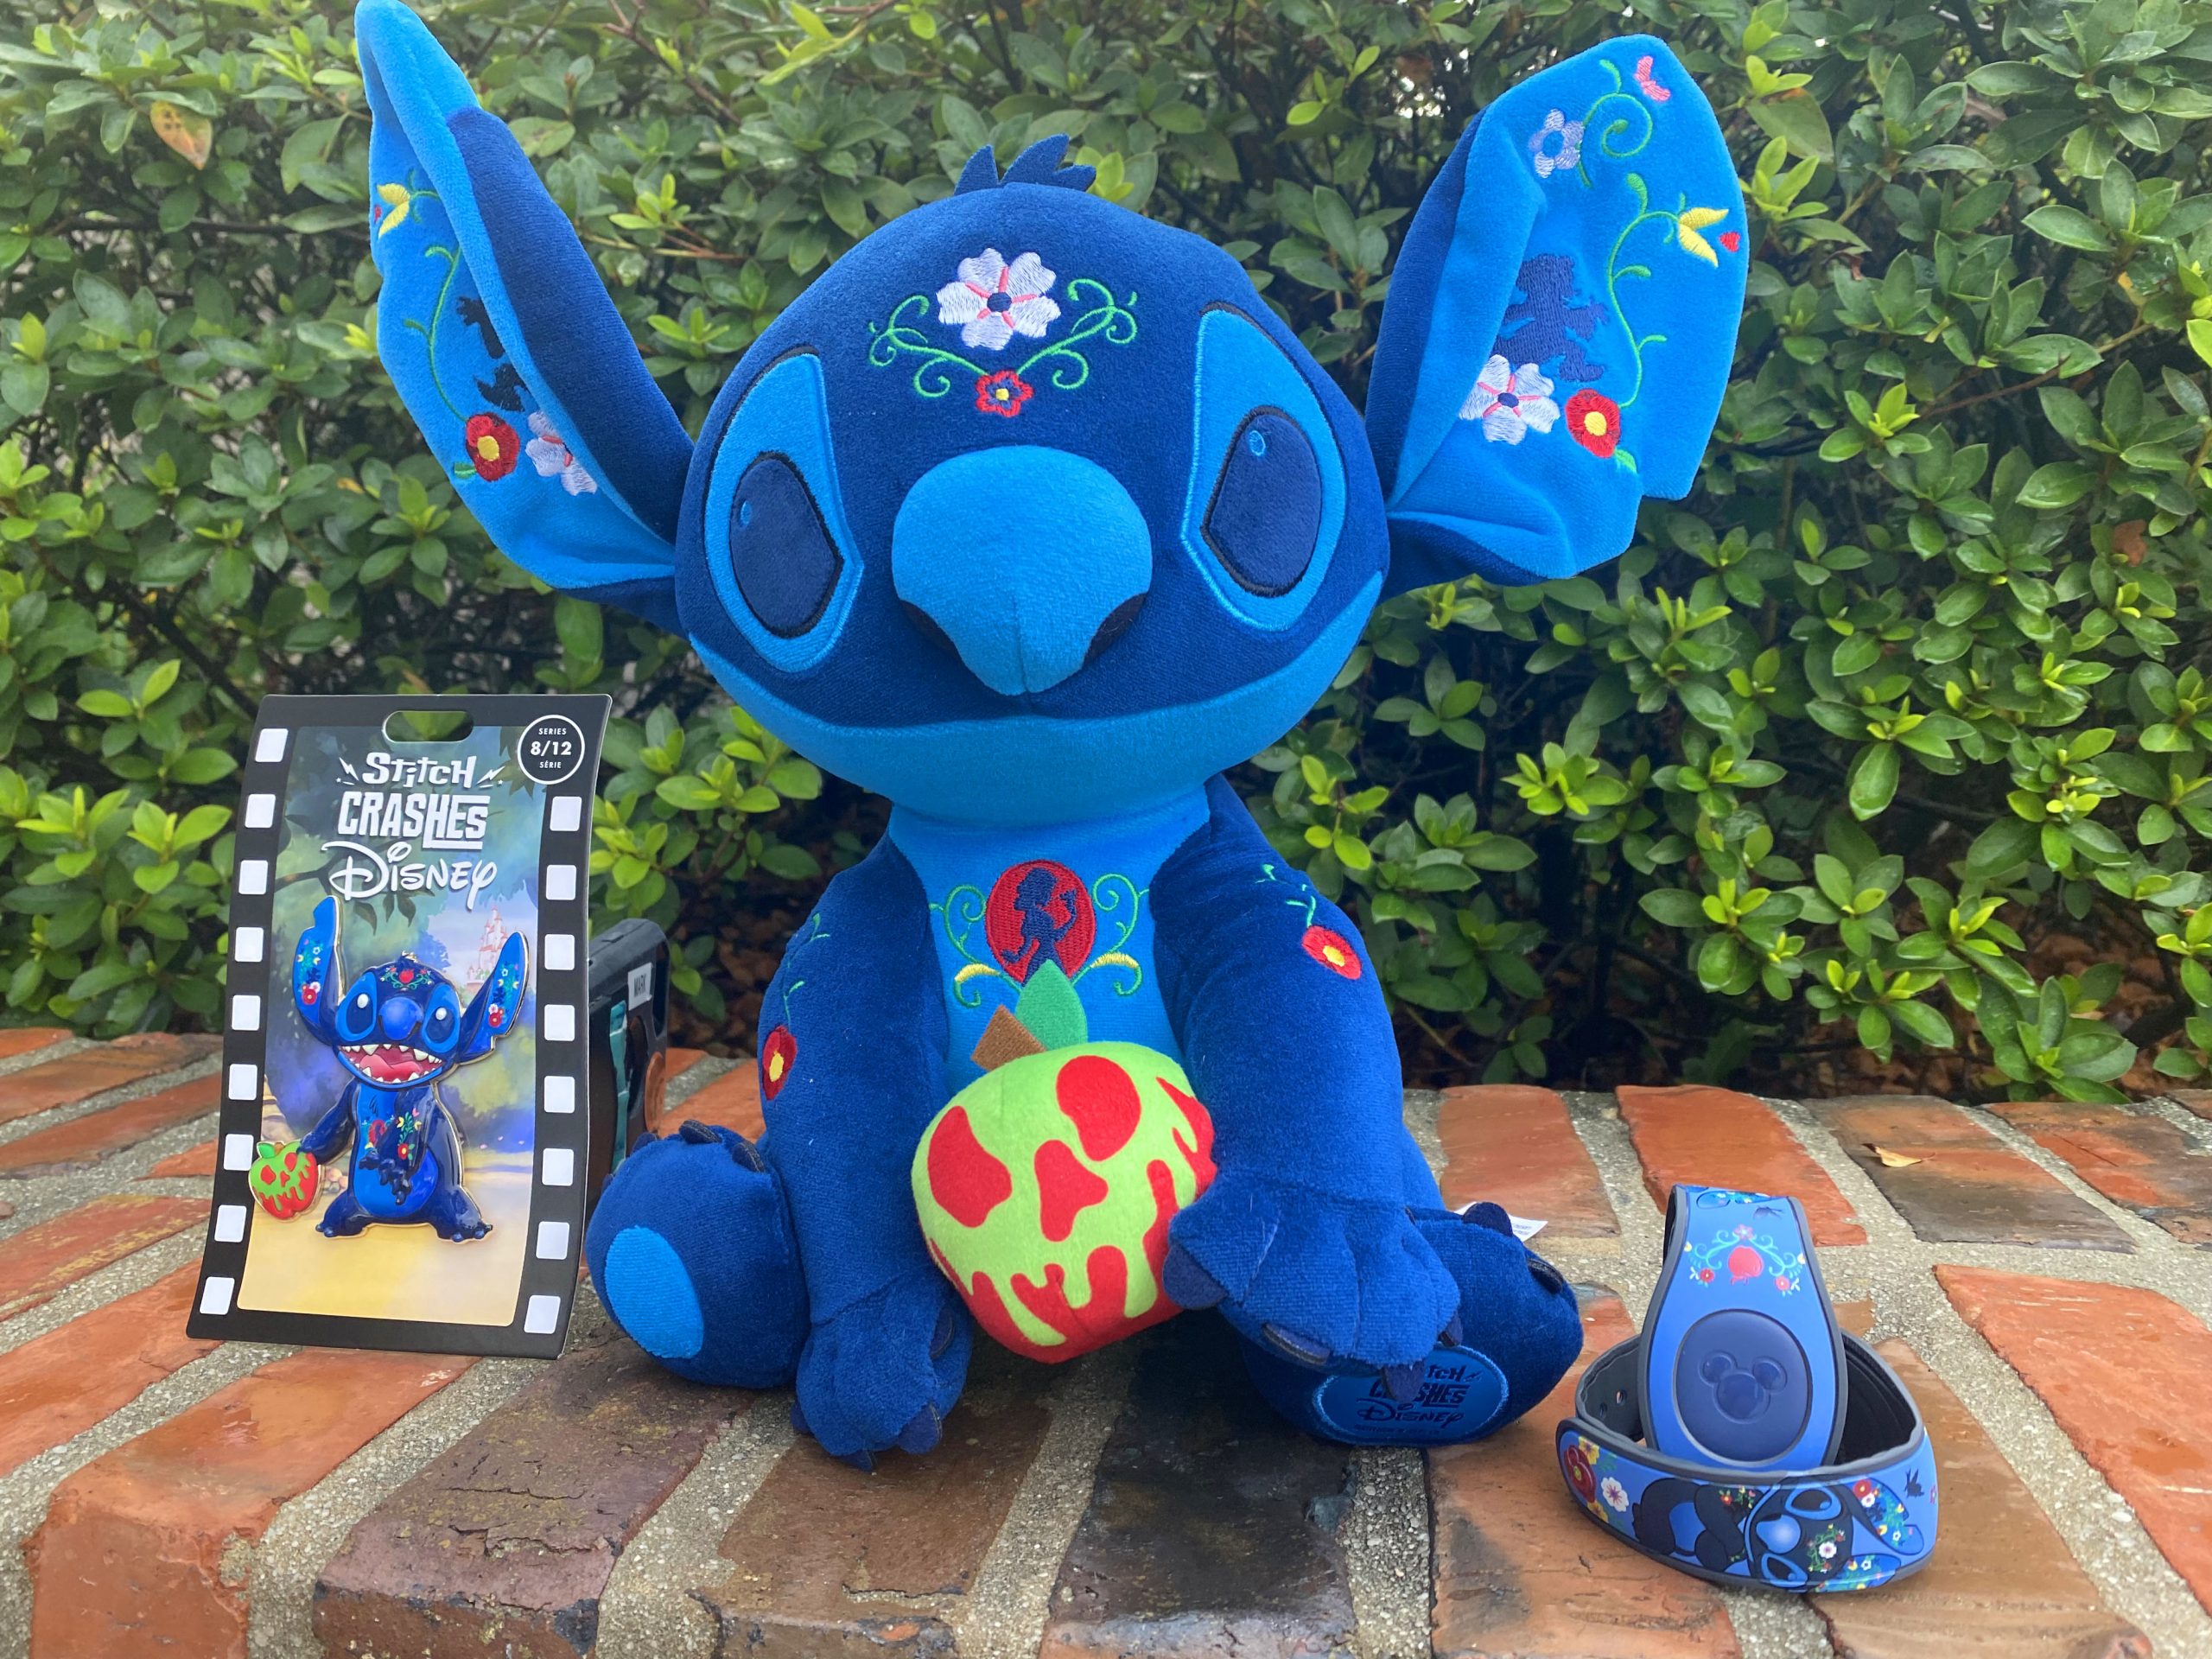 Disney Stitch Crashes Stitch Snow White Series 08 out of 12 Limited Edition 